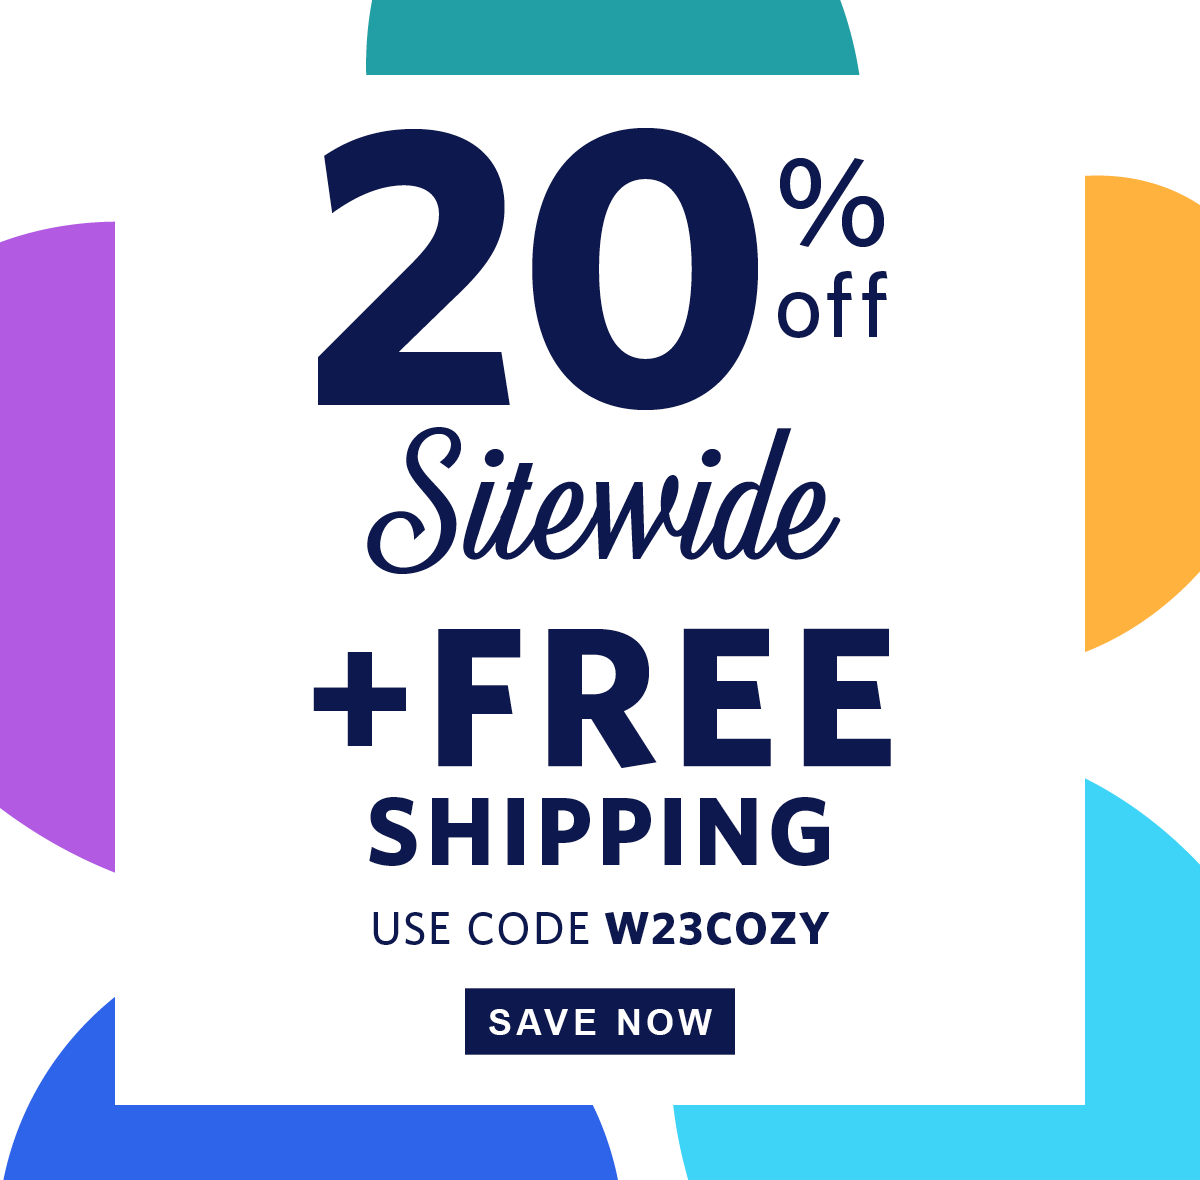 20% Off Sitewide + Free Shipping Use Code: W23COZY % off FREE SHIPPING USE CODE W23C0zY ' 